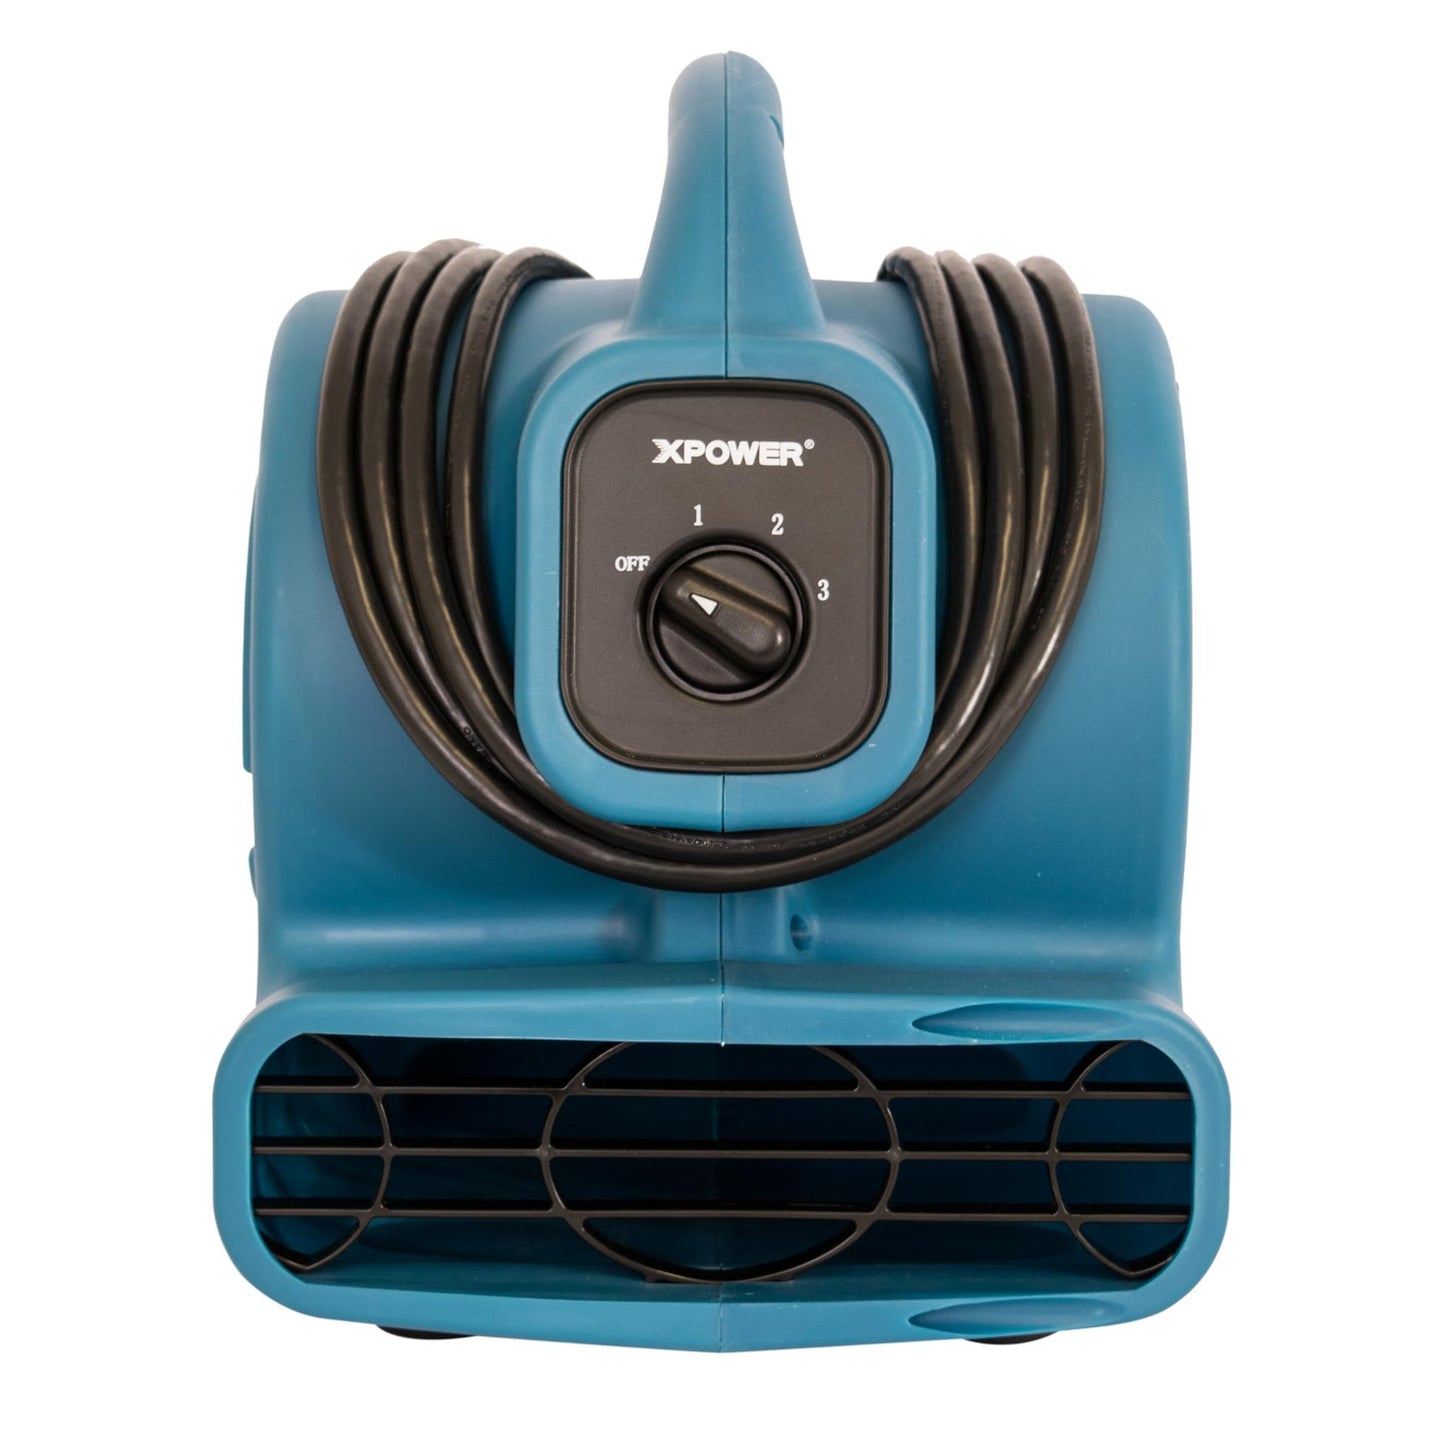 XPOWER P-80A 600 CFM Multi-Purpose Mini Mighty Air Mover, Utility Fan, Dryer, Blower with Built-in Power Outlets